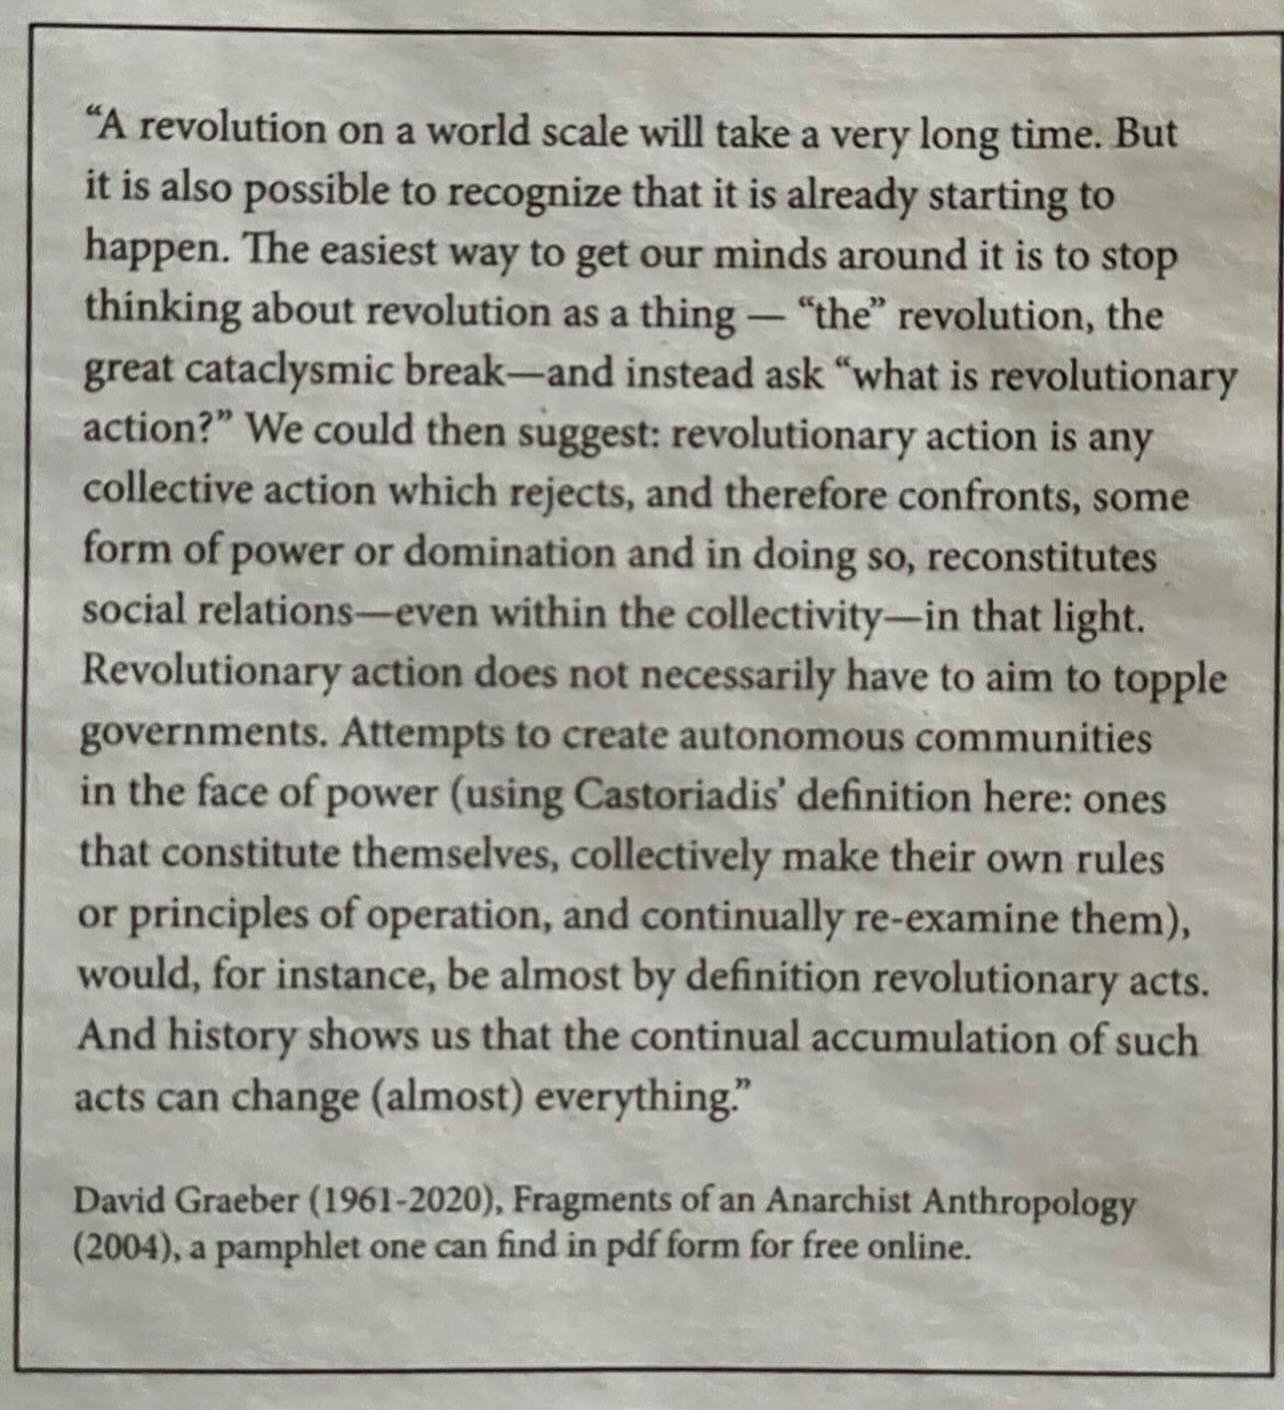 &quot;A revolution on a world scale will take a very long time. But it is also possible to recognize that it is already starting to happen. The easiest way to get our minds around it is to stop thinking about revolution as a thing &mdash; &quot;the&q